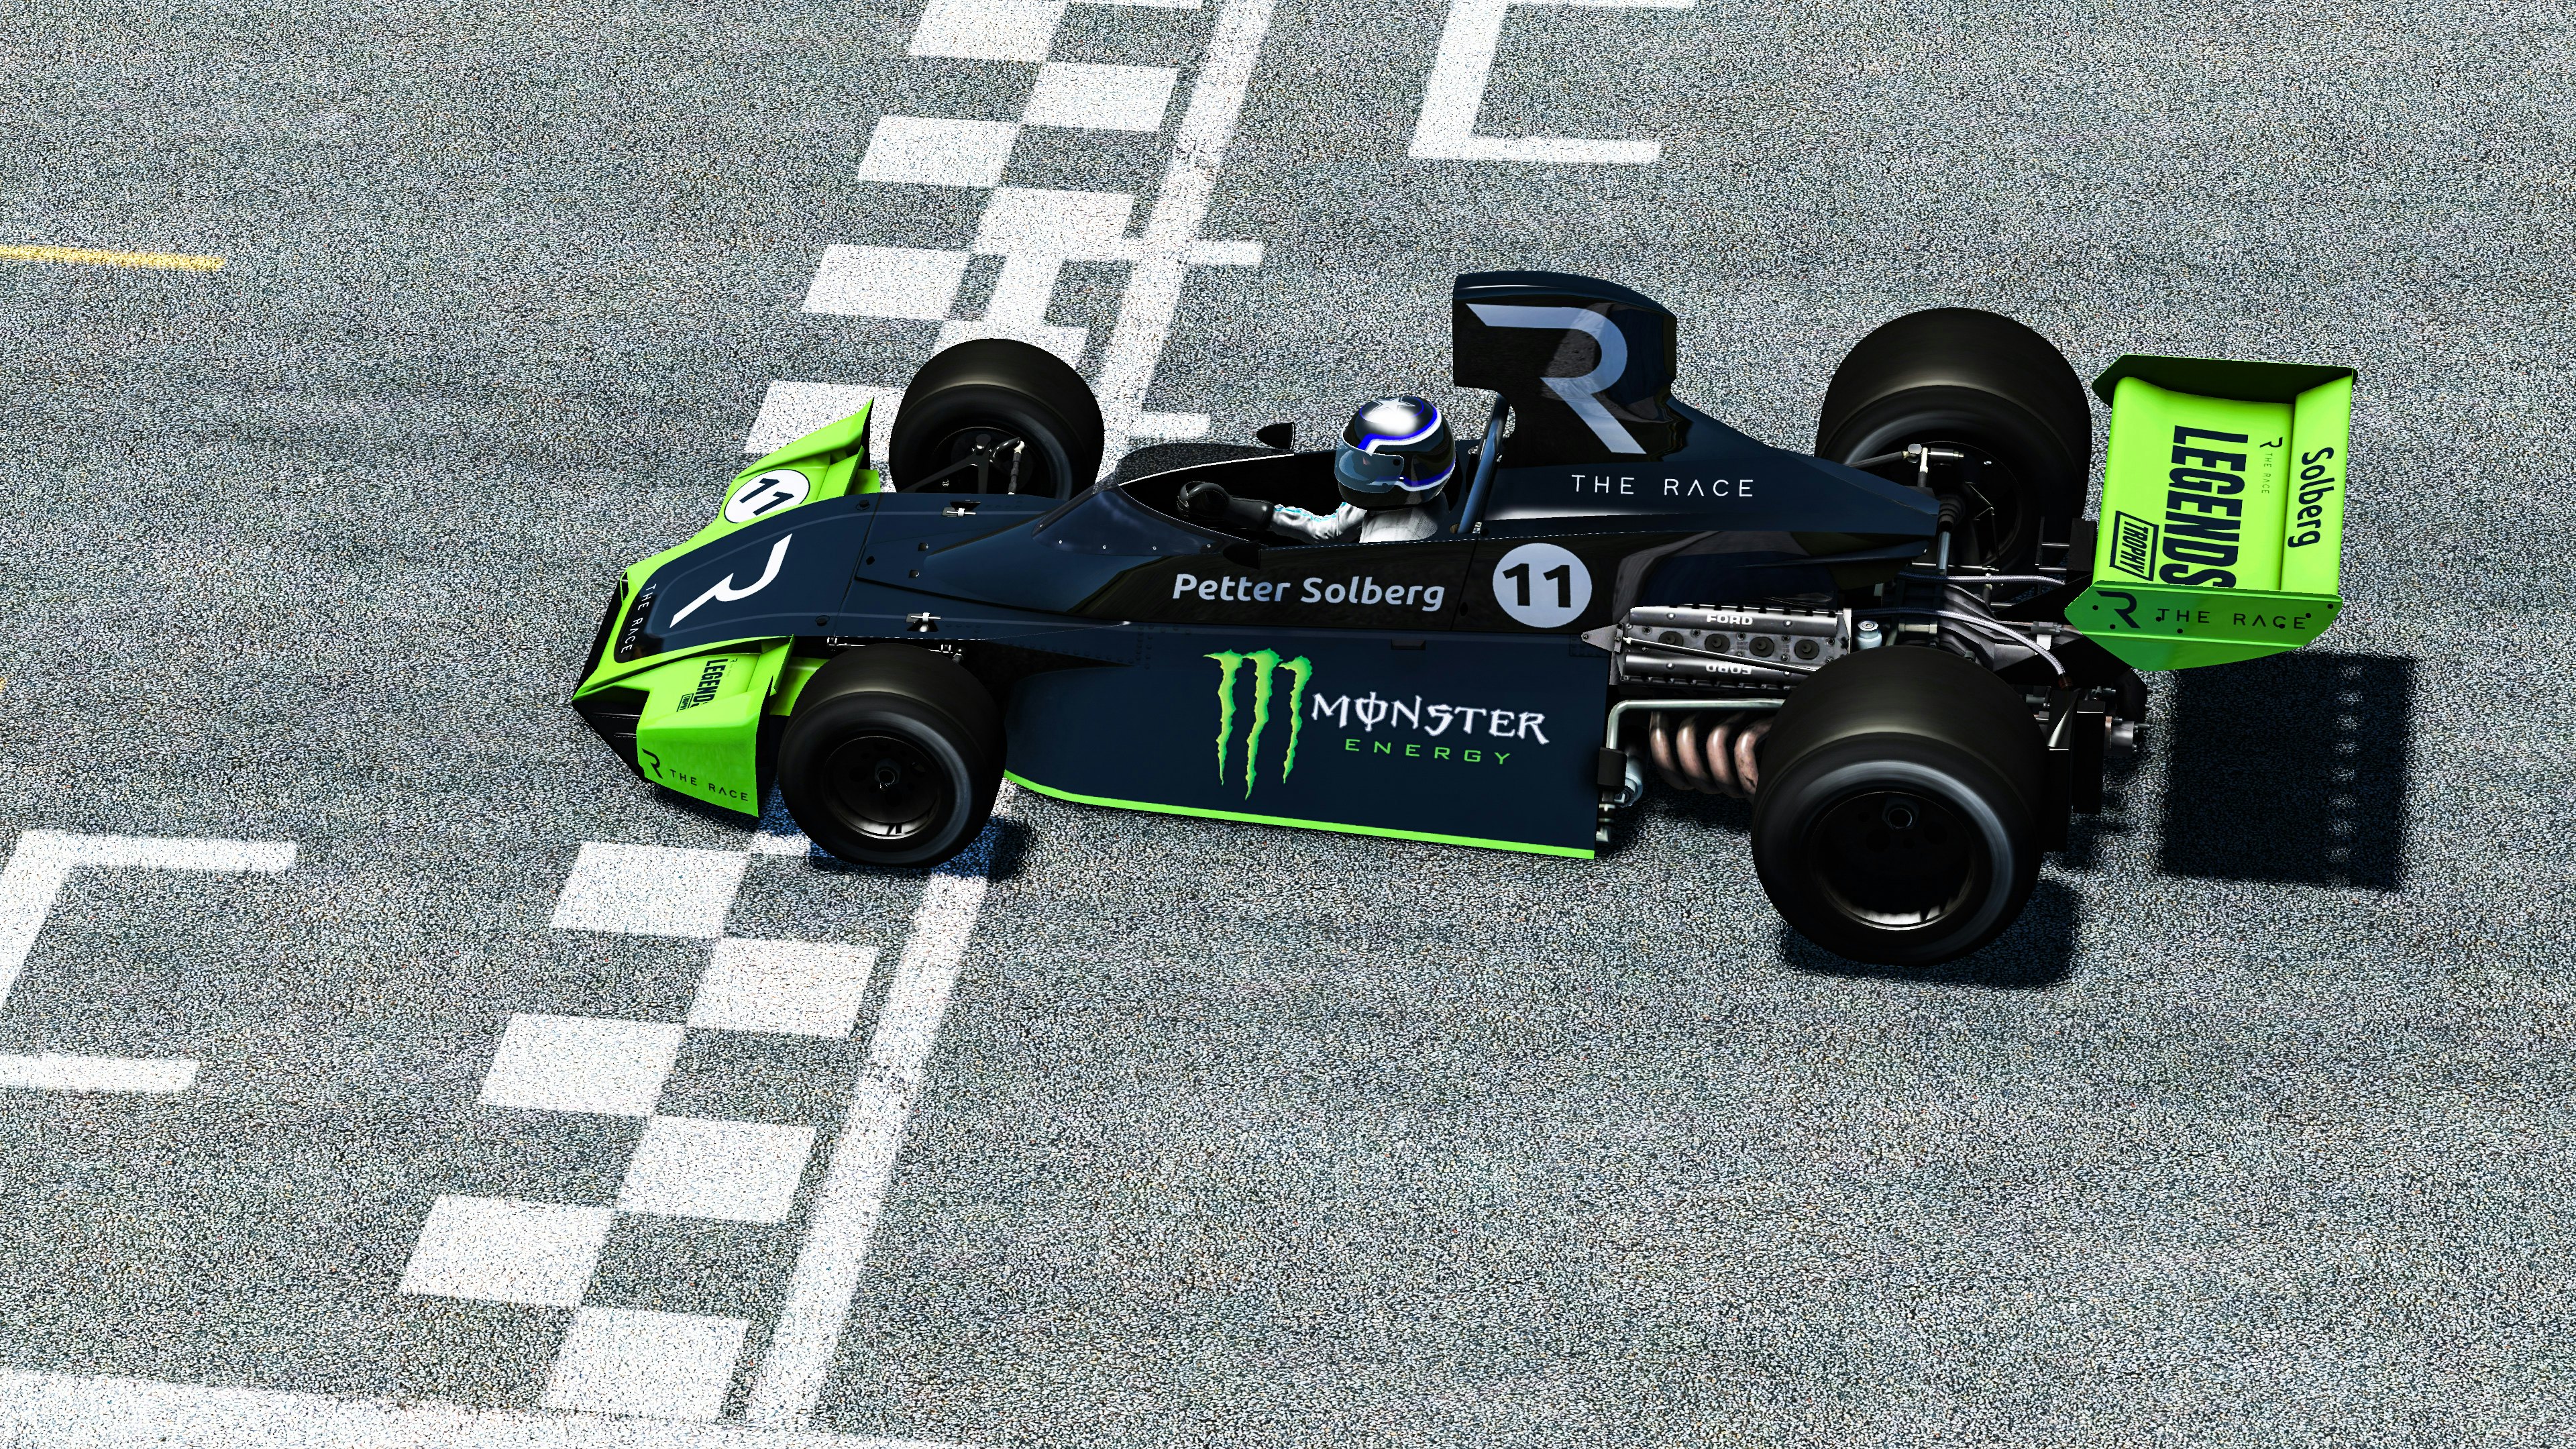 Which one looks best? I think the Brabham : r/formula1